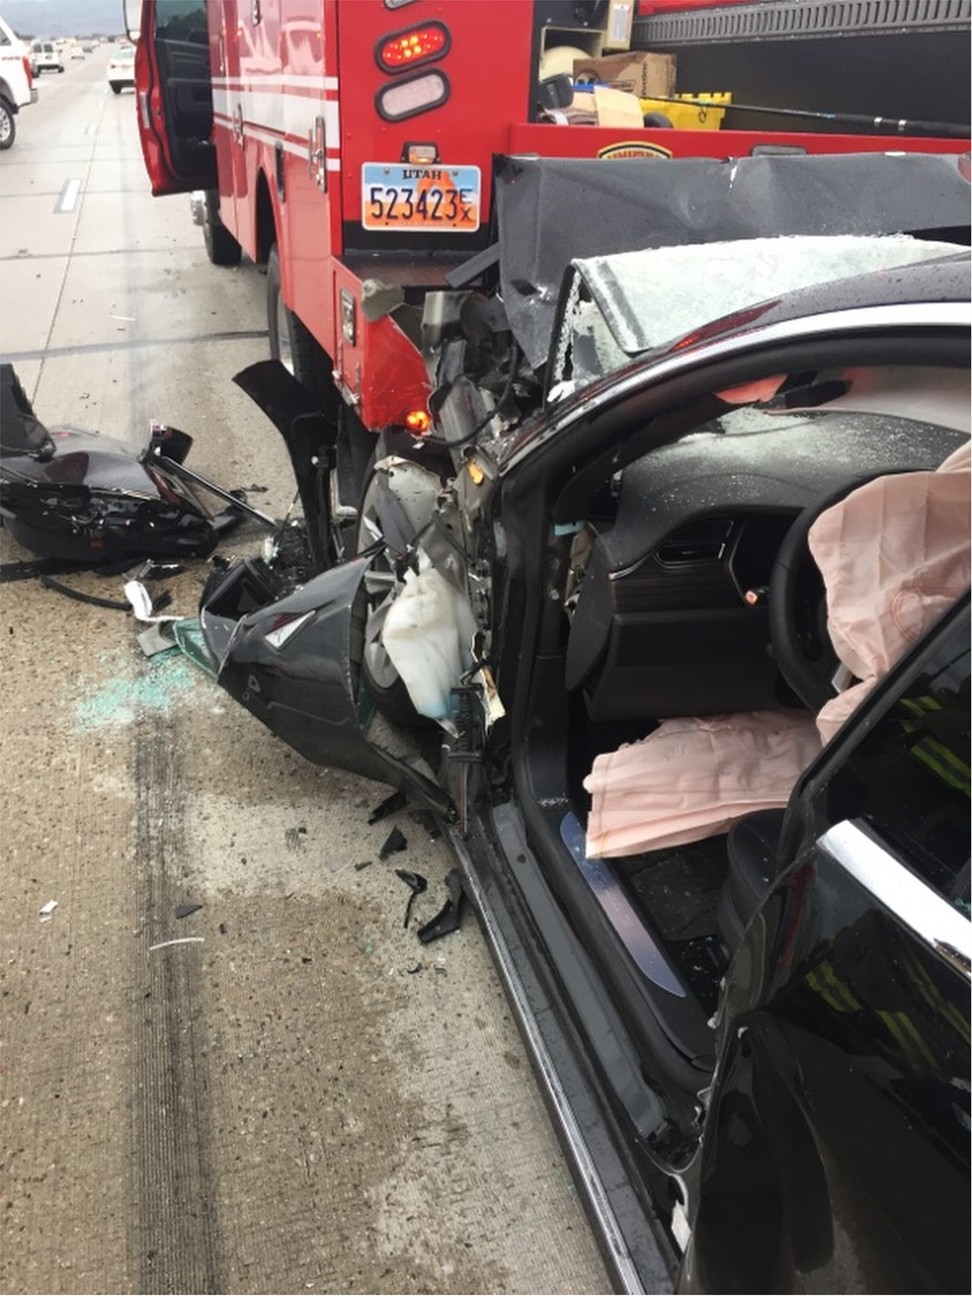 Police Sgt. Samuel Winkler said the car's air bags were activated and that the Tesla's 28-year-old driver suffered a broken right ankle, while the driver of the mechanic truck didn't require treatment. Photo: South Jordan Police Department via AP